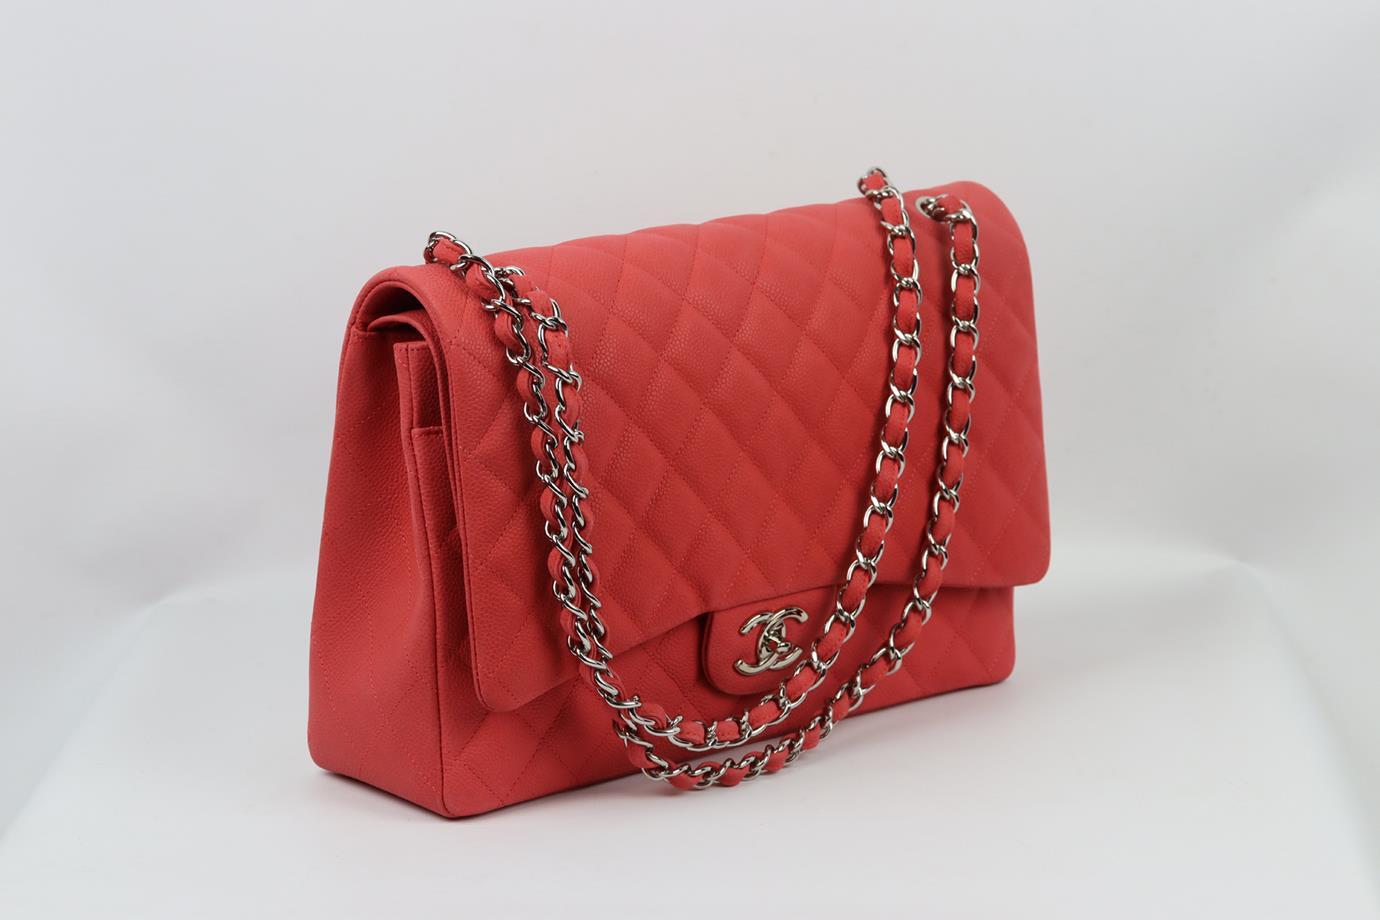 Chanel 2014 Maxi Classic Quilted Matte Caviar Leather Double Flap Shoulder Bag For Sale 3